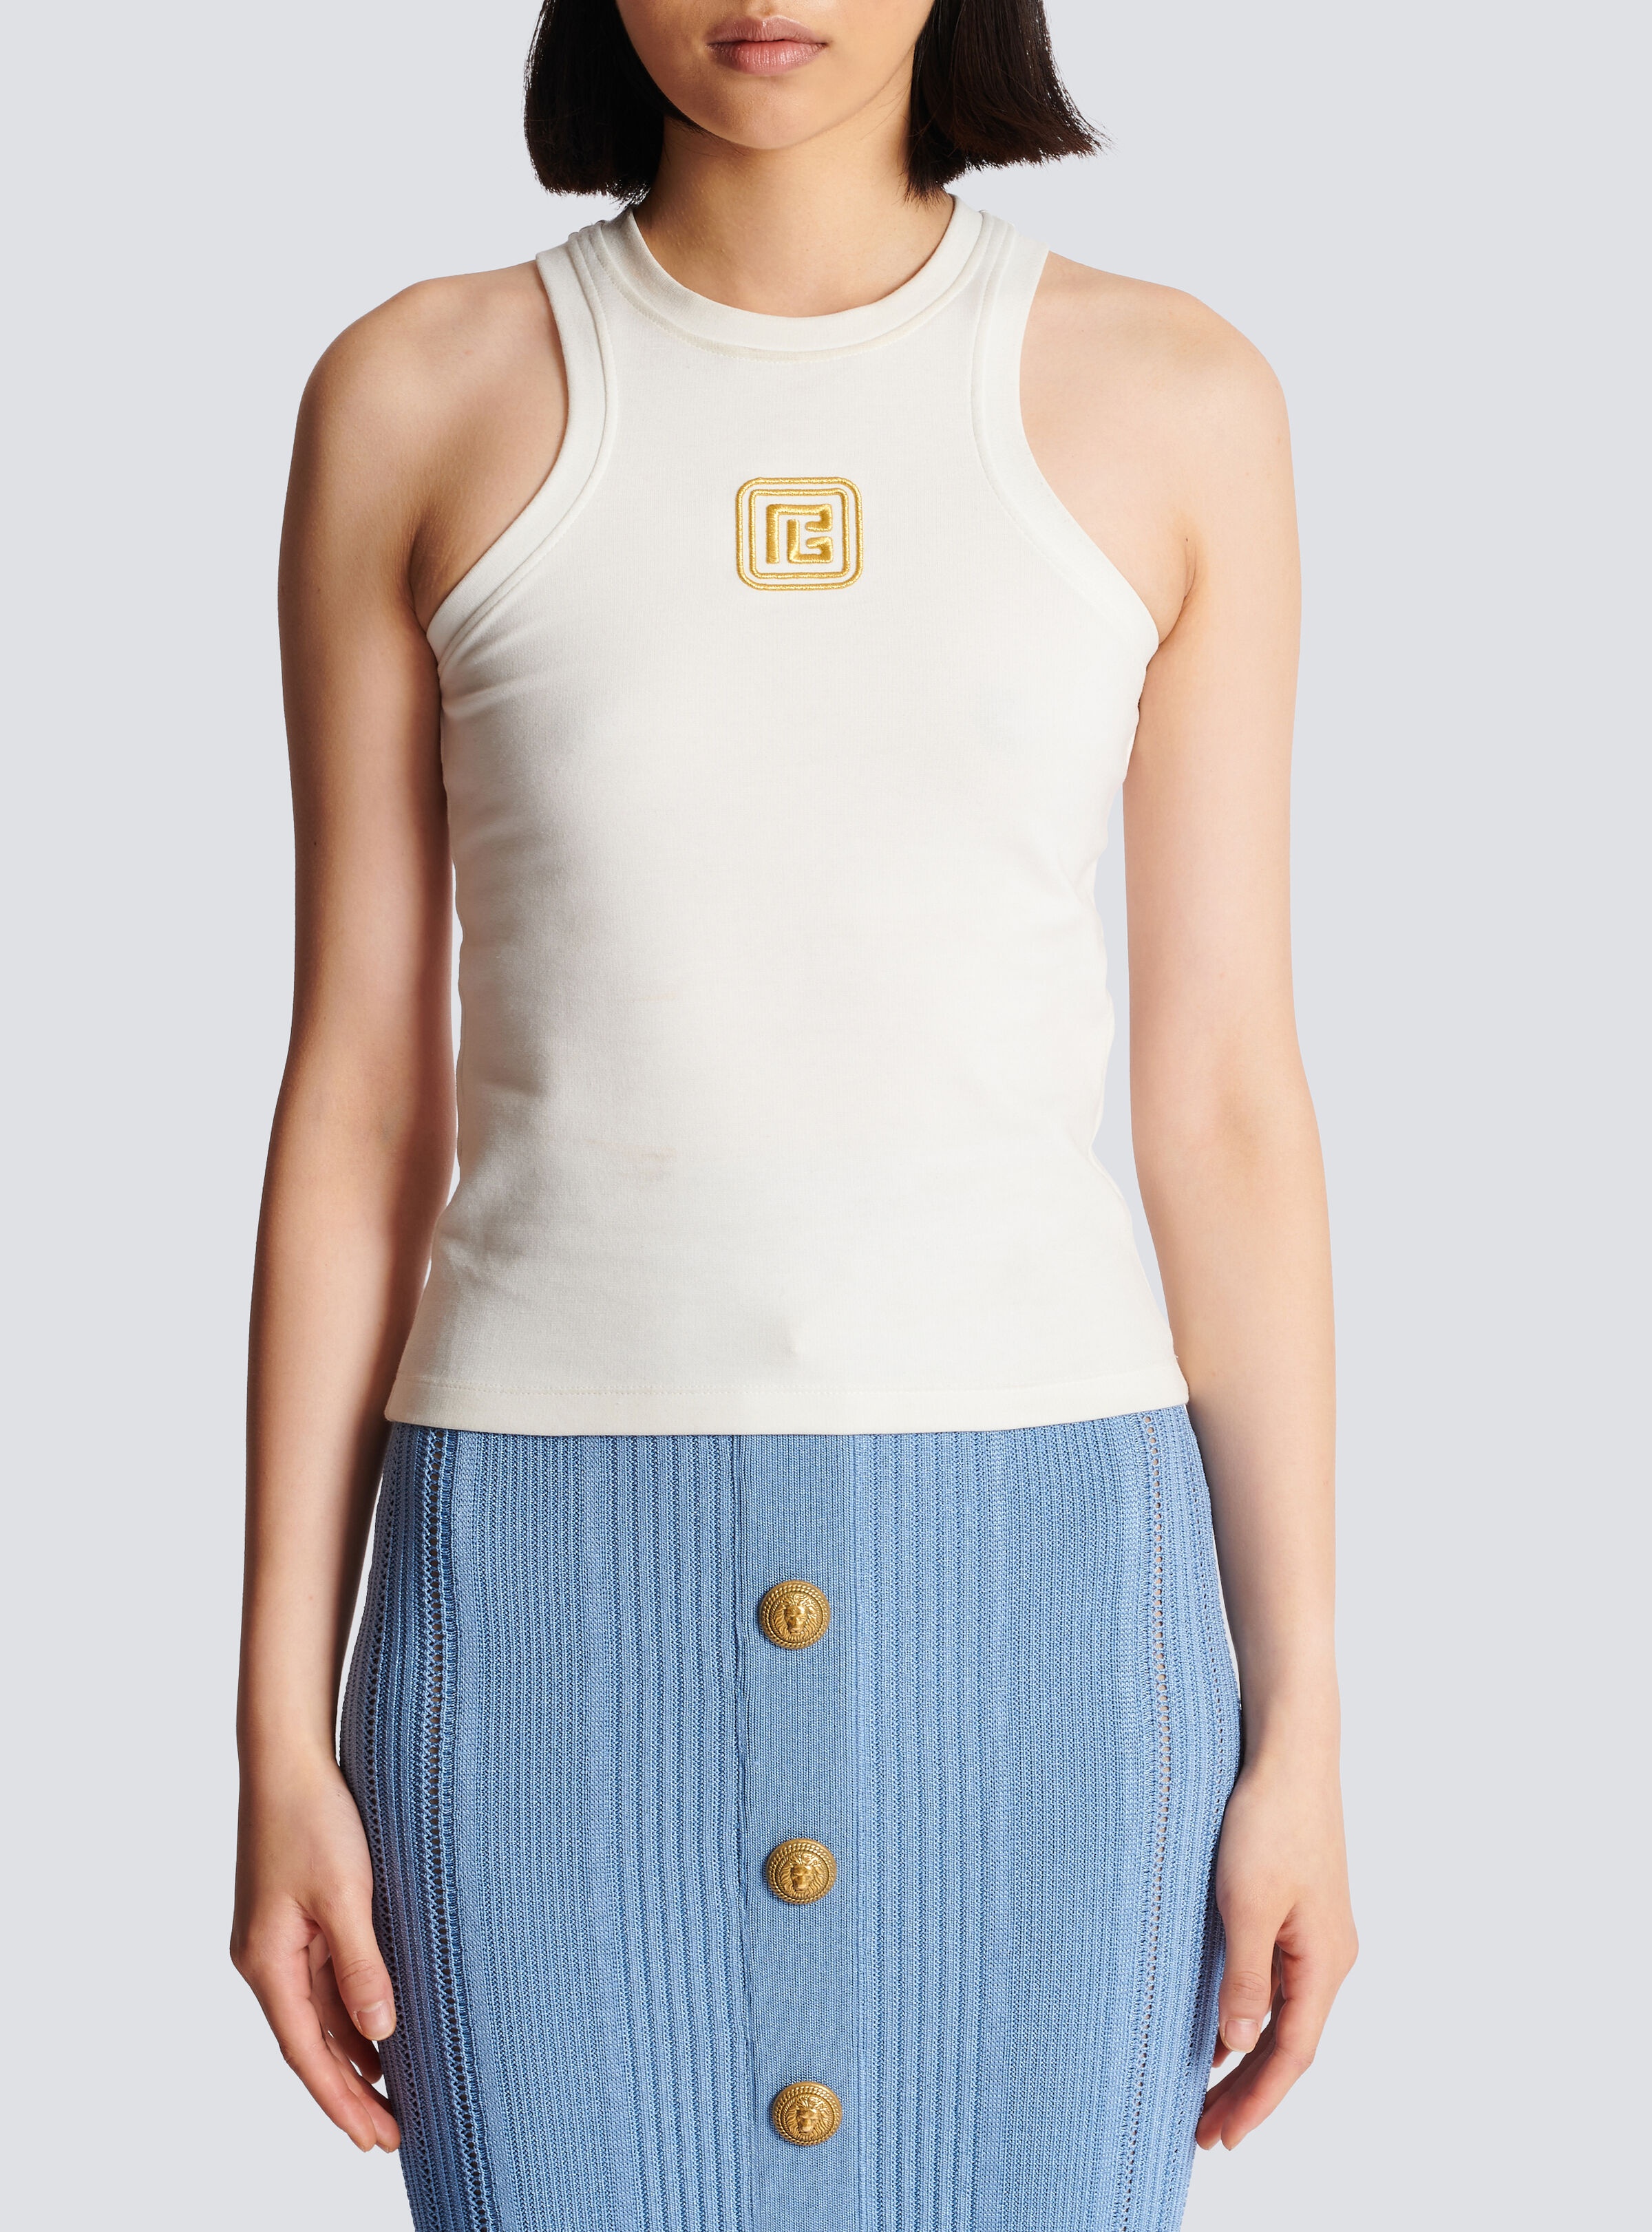 PB embroidered tank top - 5